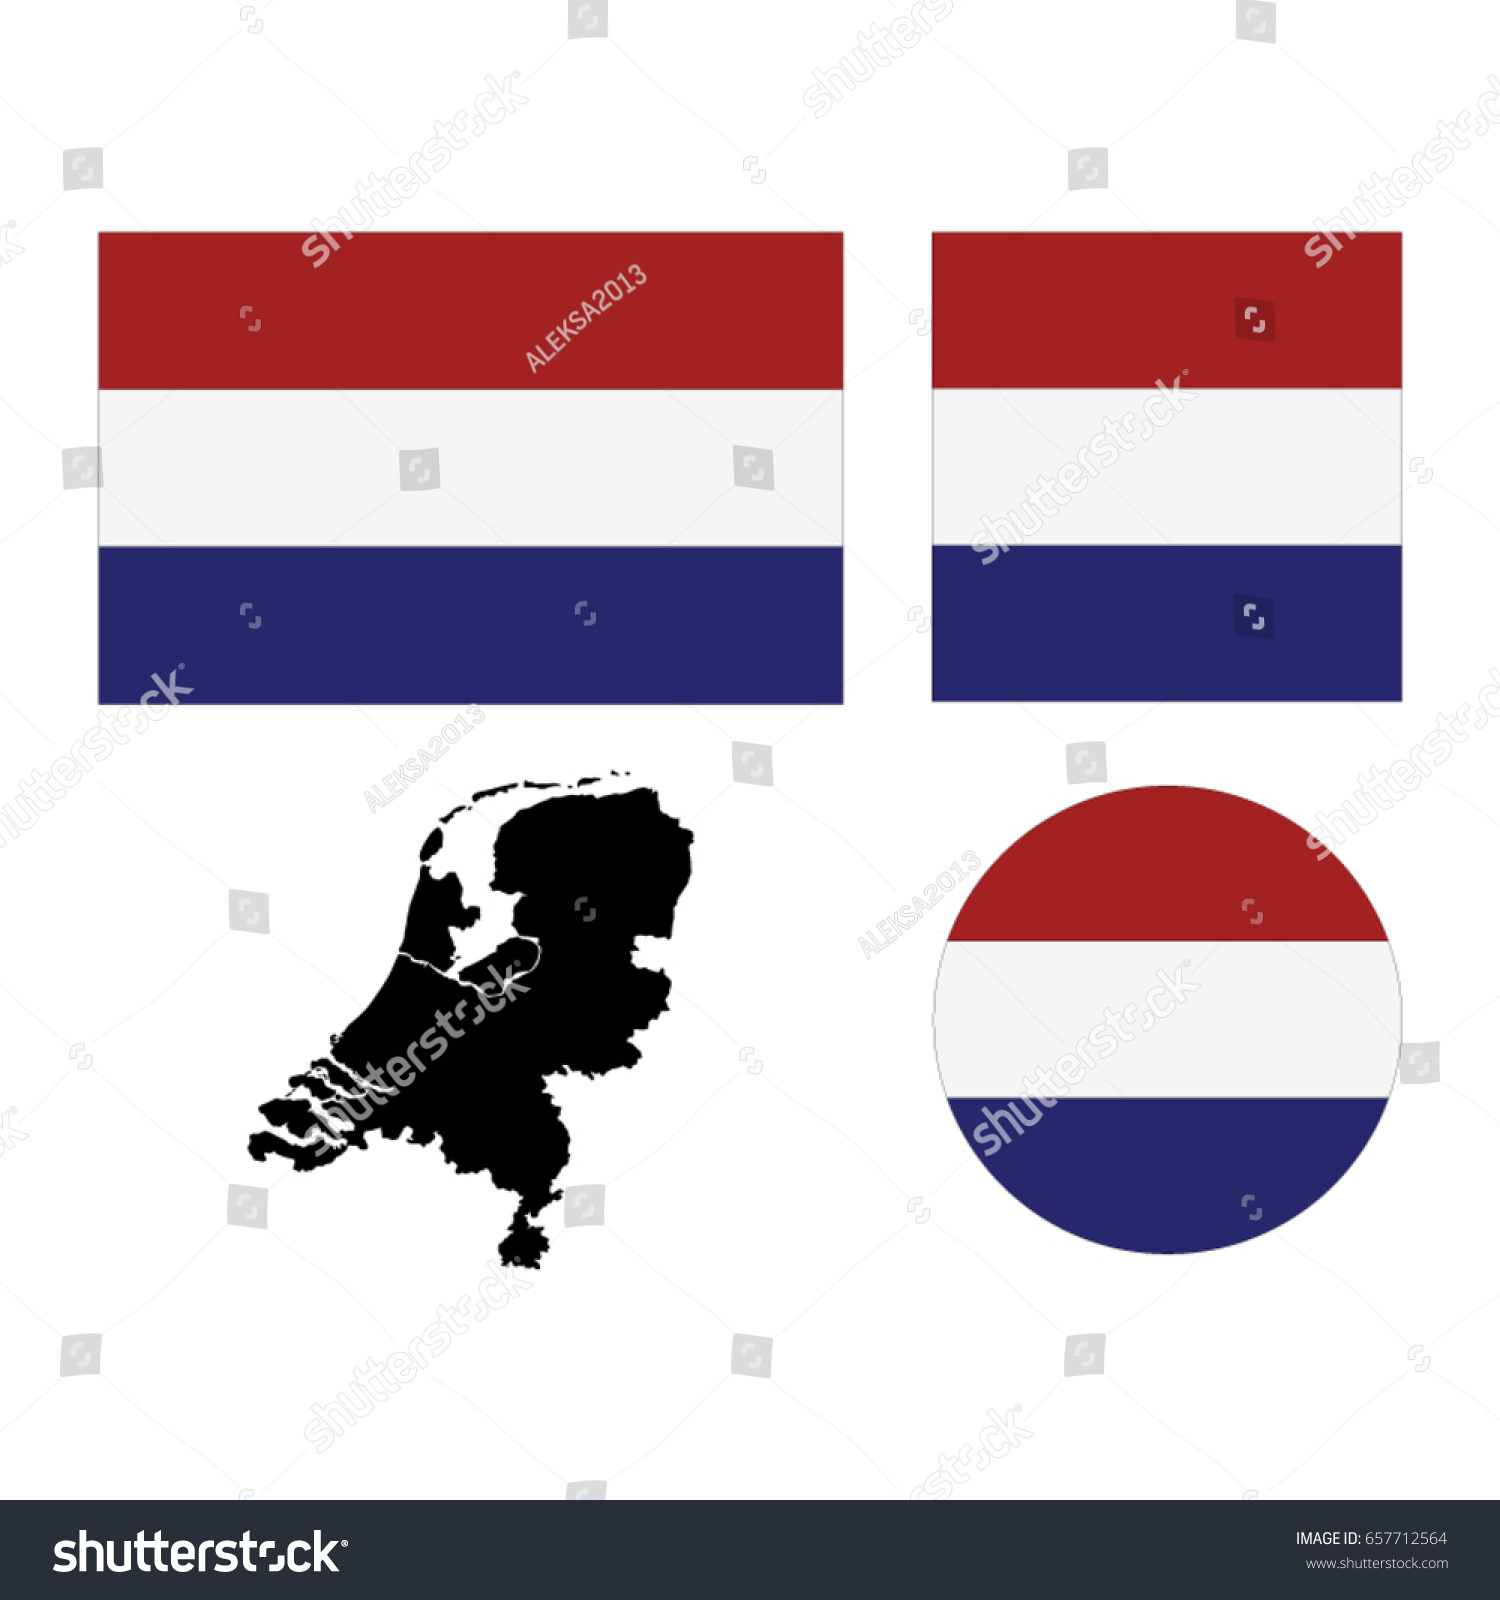 Vector Illustration Of Dutch Flag And Map Royalty Free Stock Vector 657712564